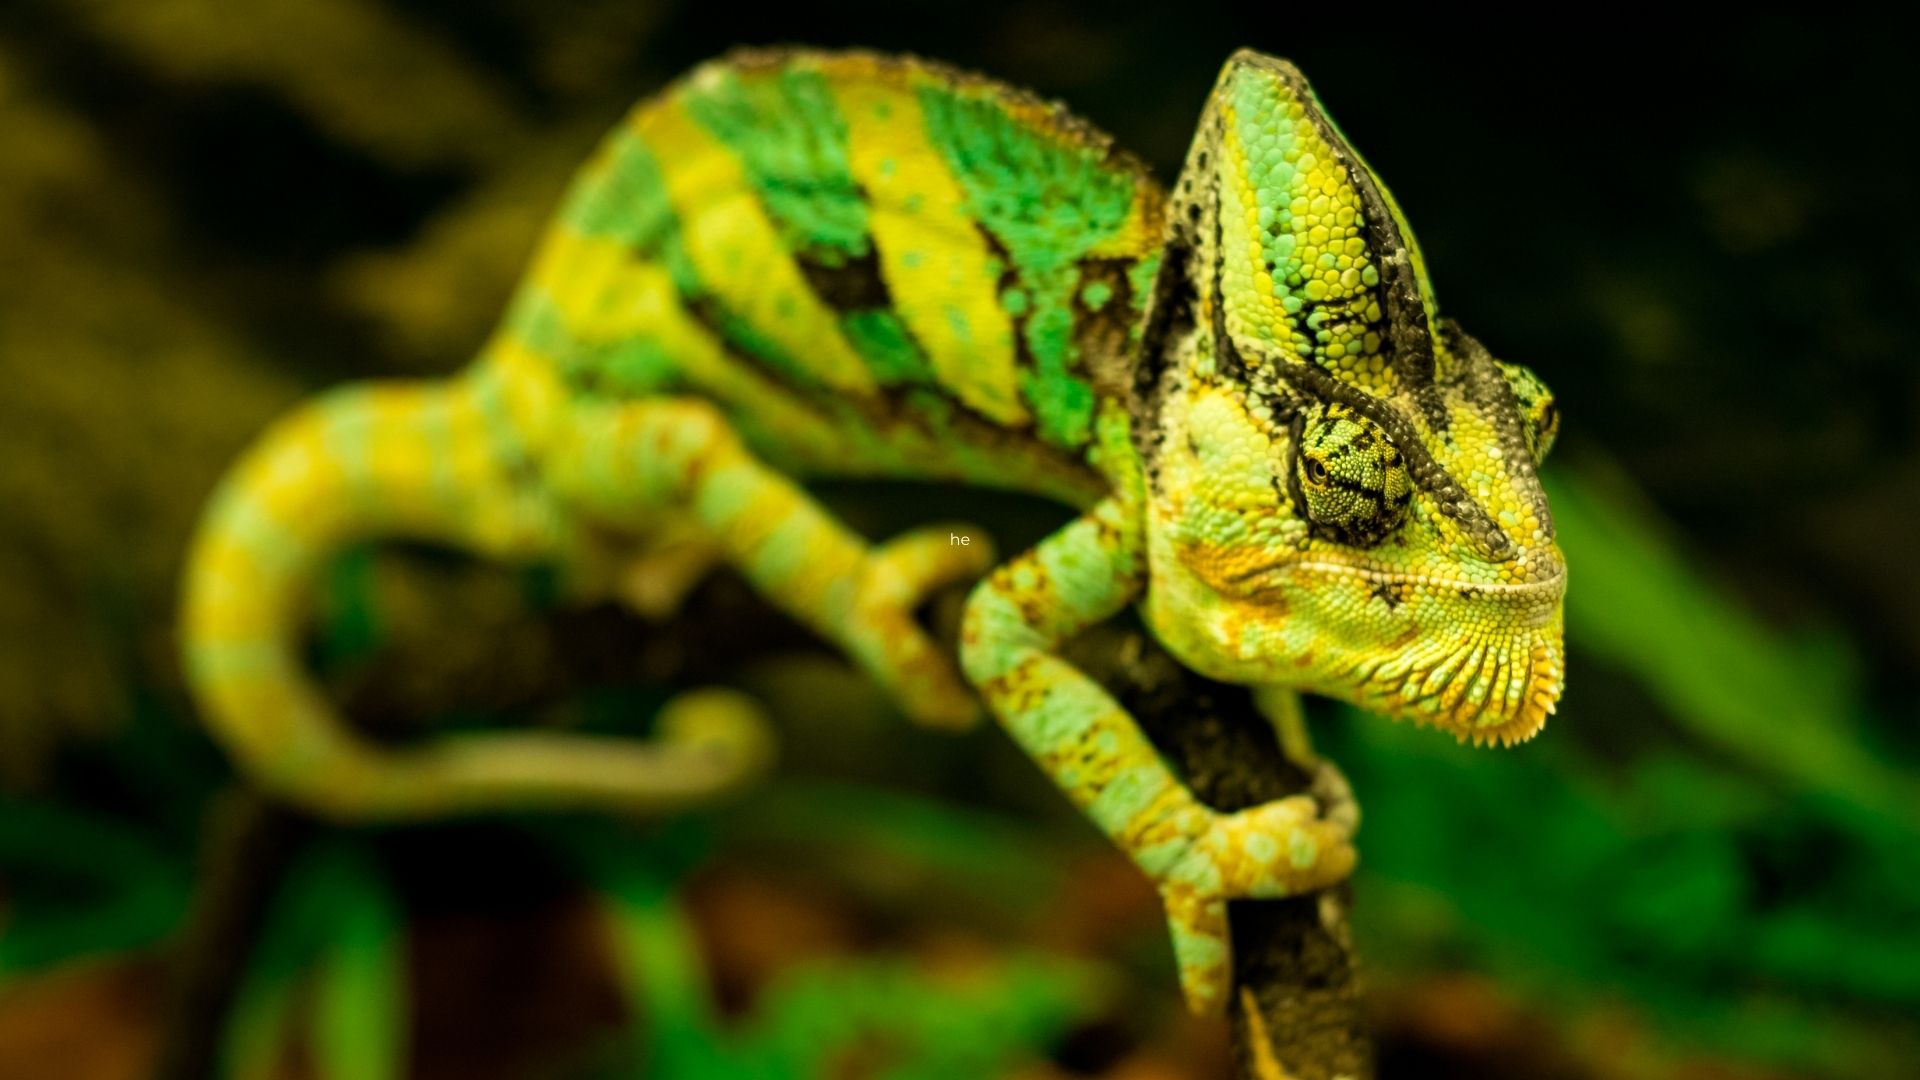 Top Tips On Reptile Care